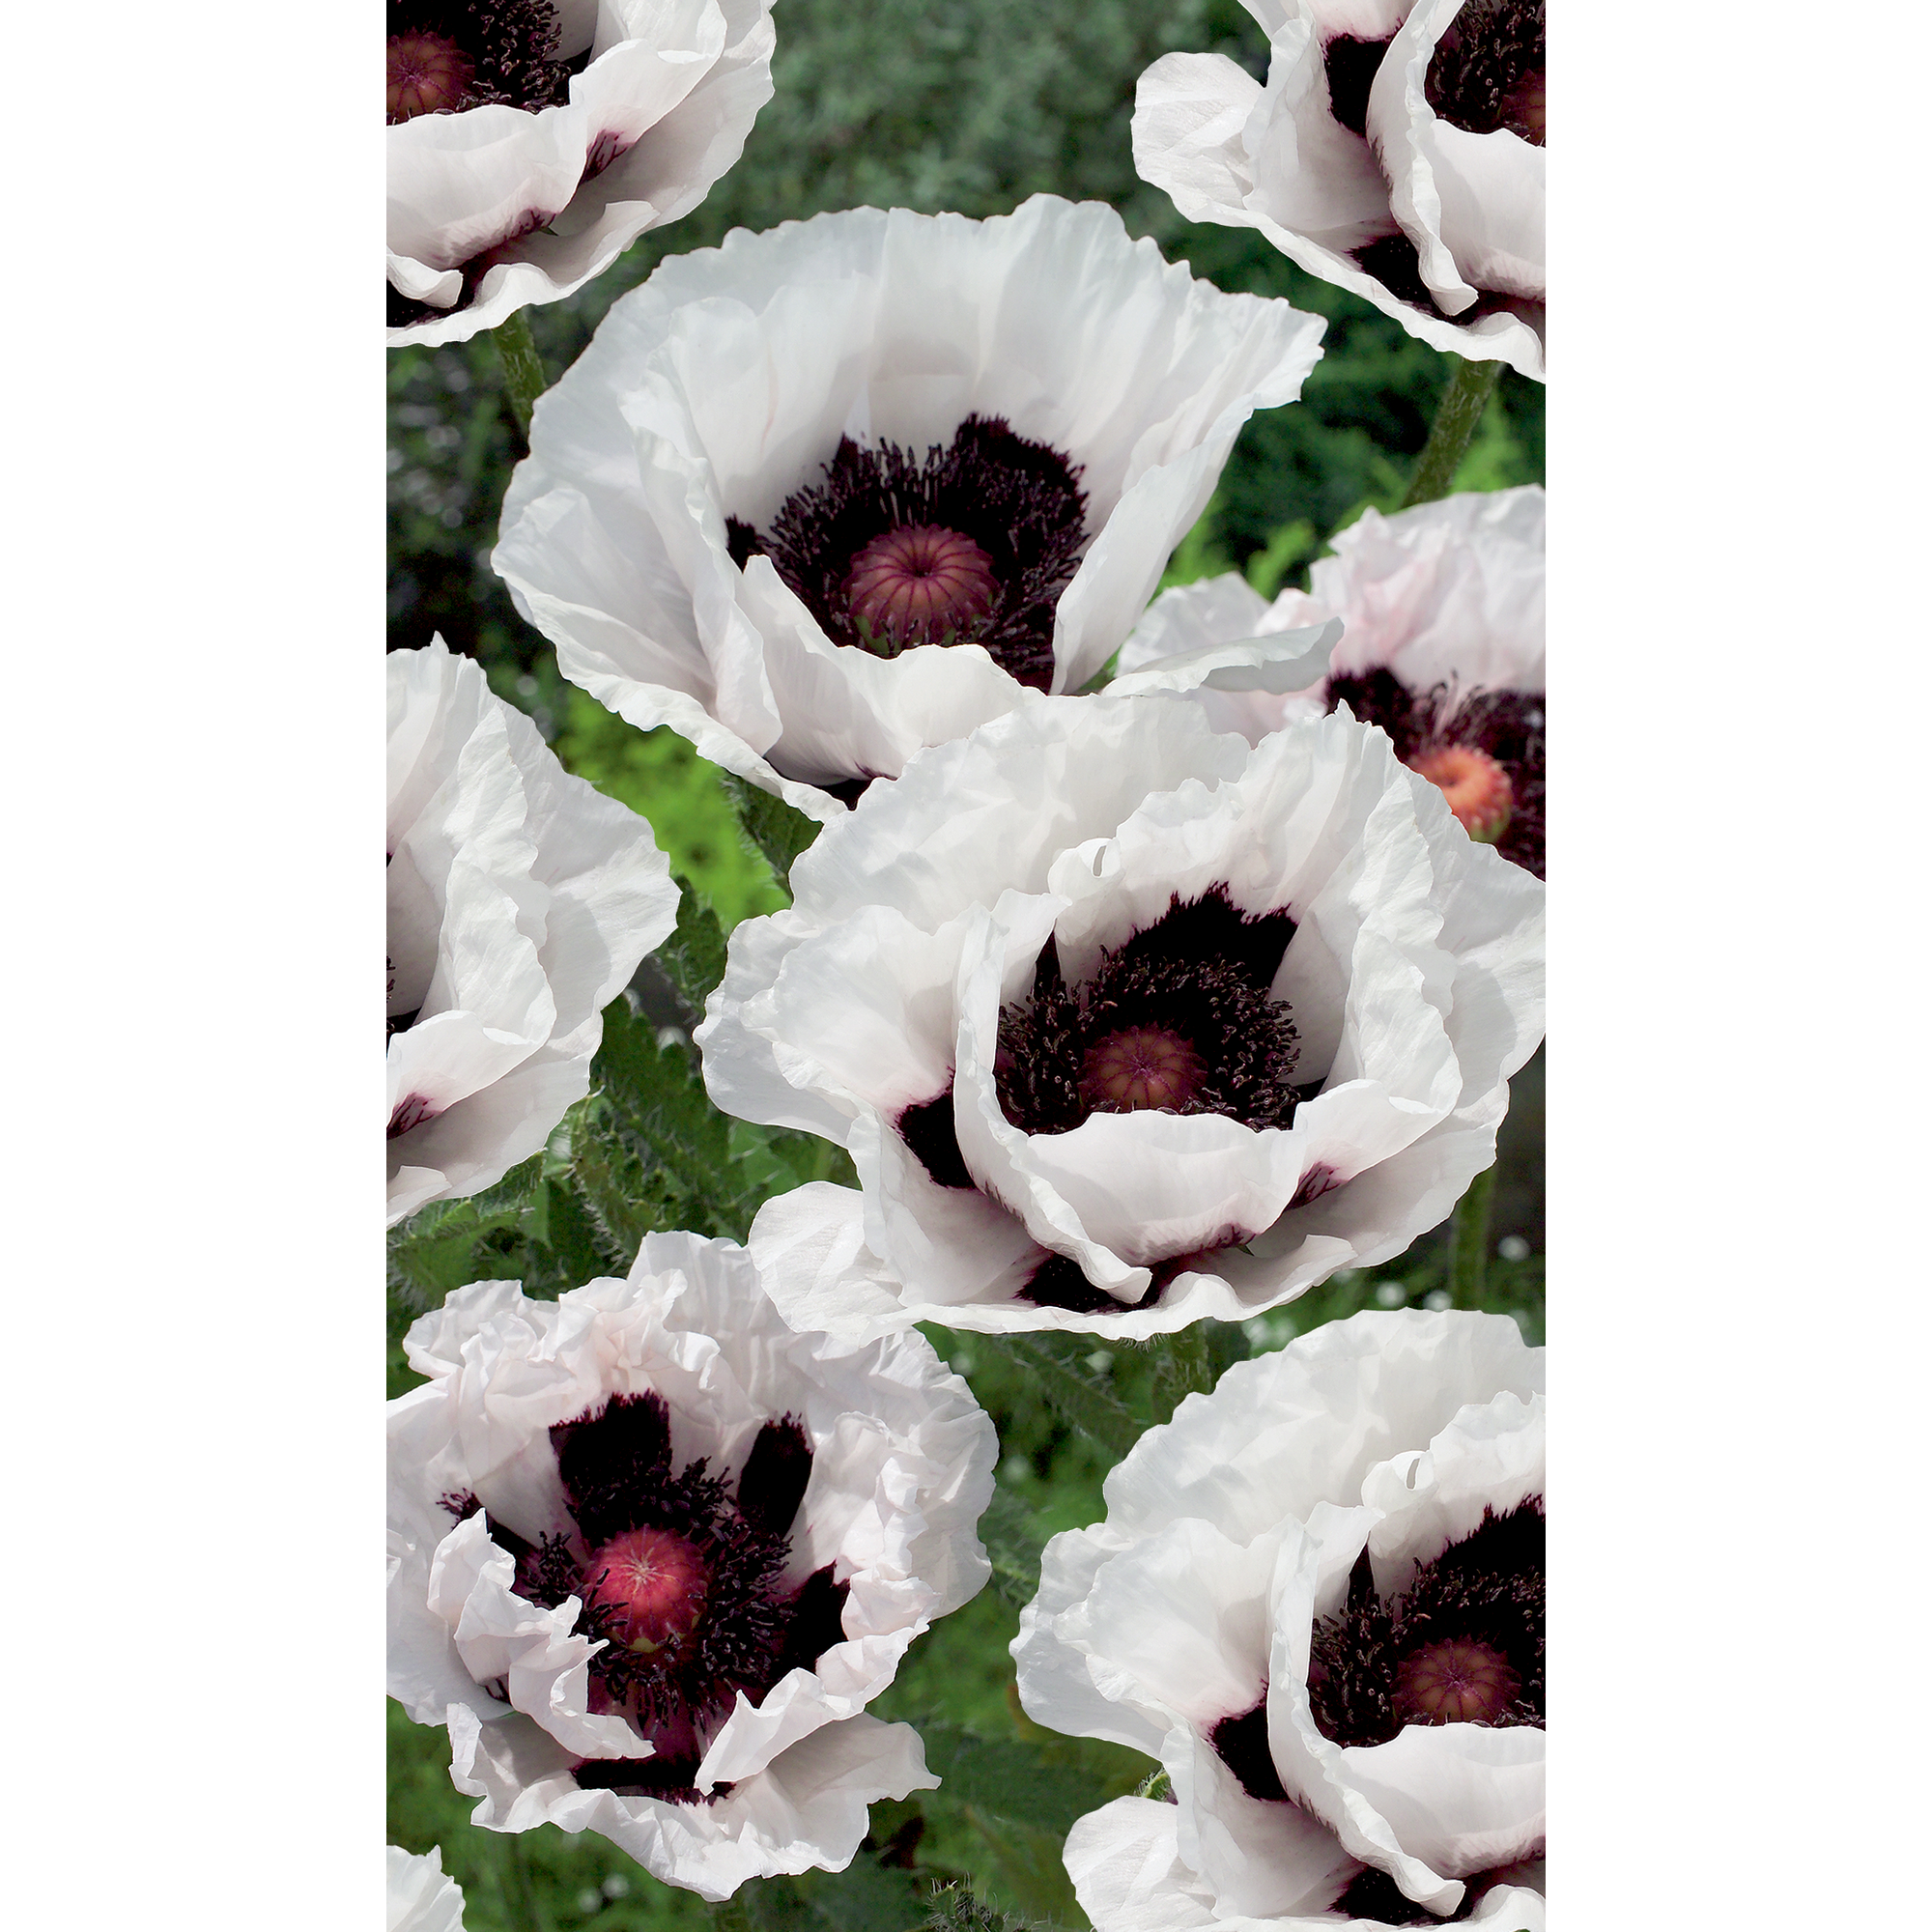 Orientalischer Mohn 'Perry's White', 9 cm Topf, 3er-Set + product picture